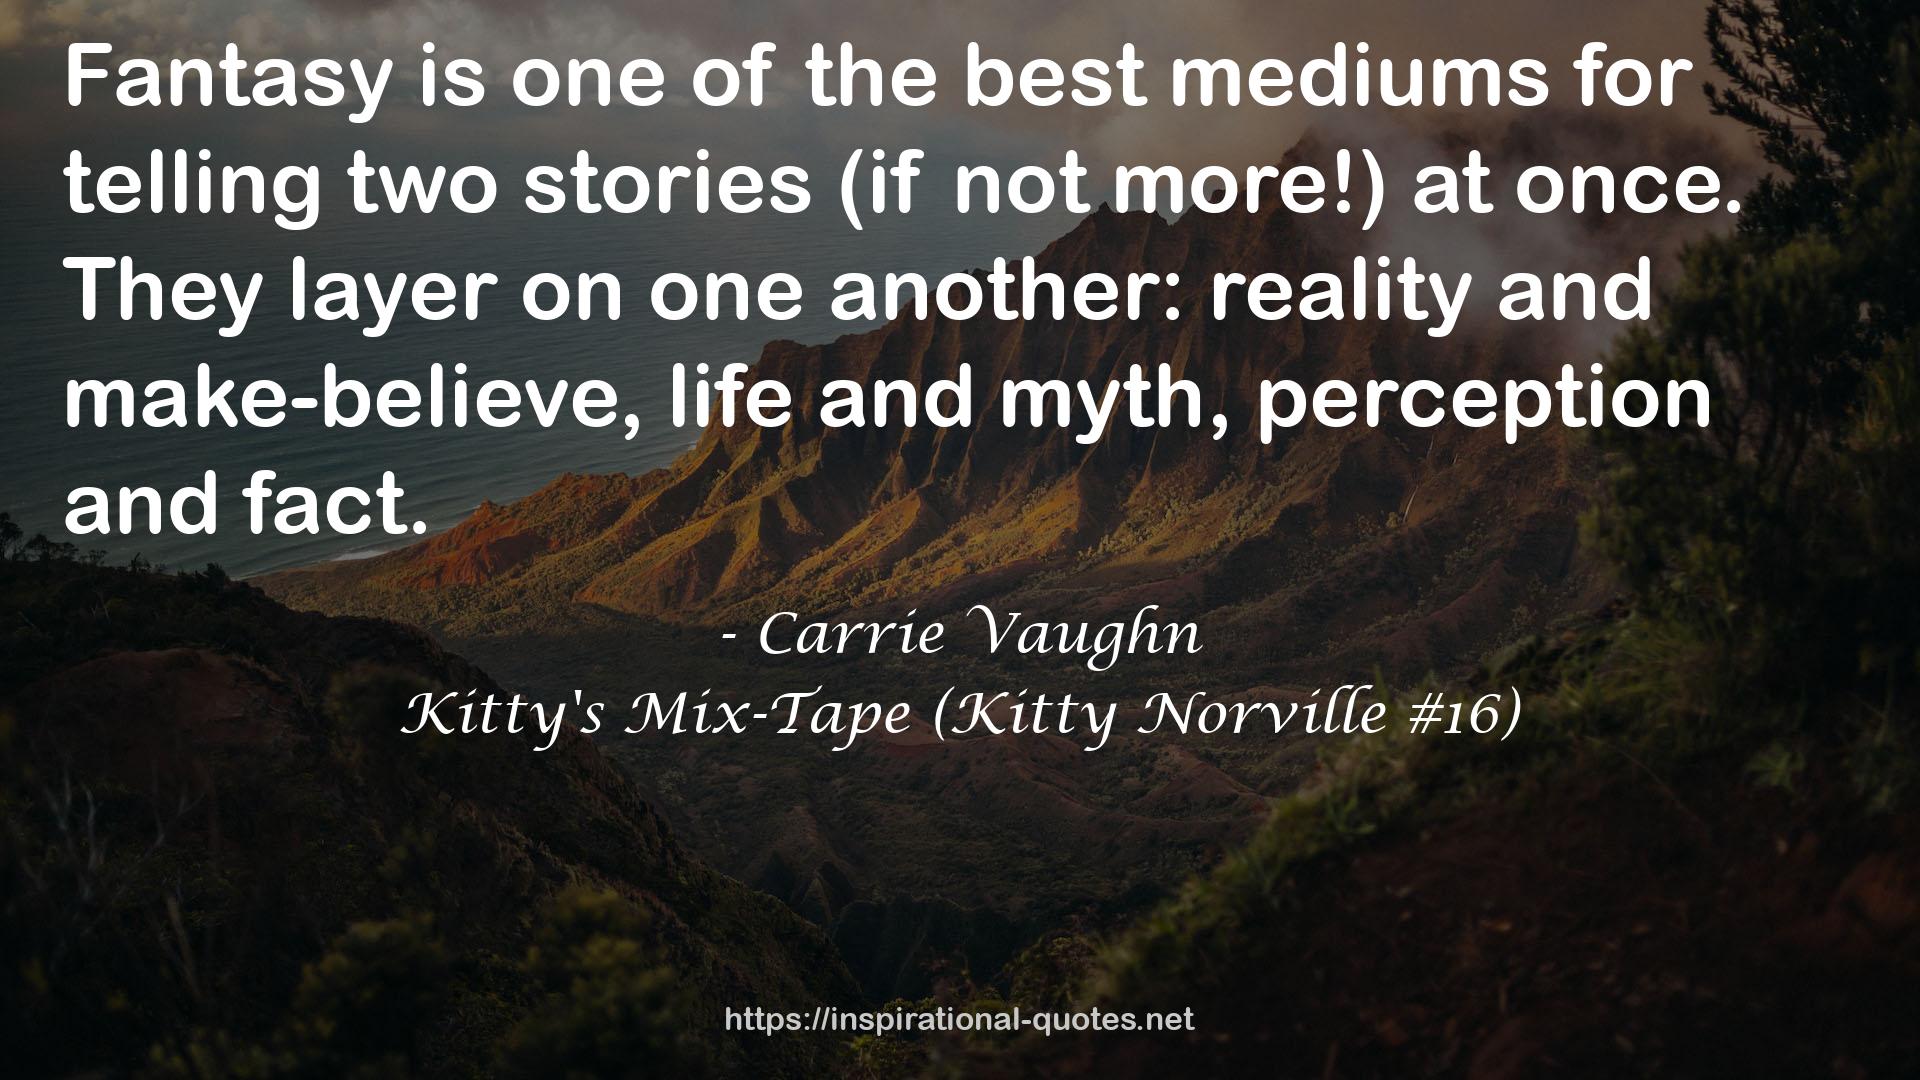 Kitty's Mix-Tape (Kitty Norville #16) QUOTES